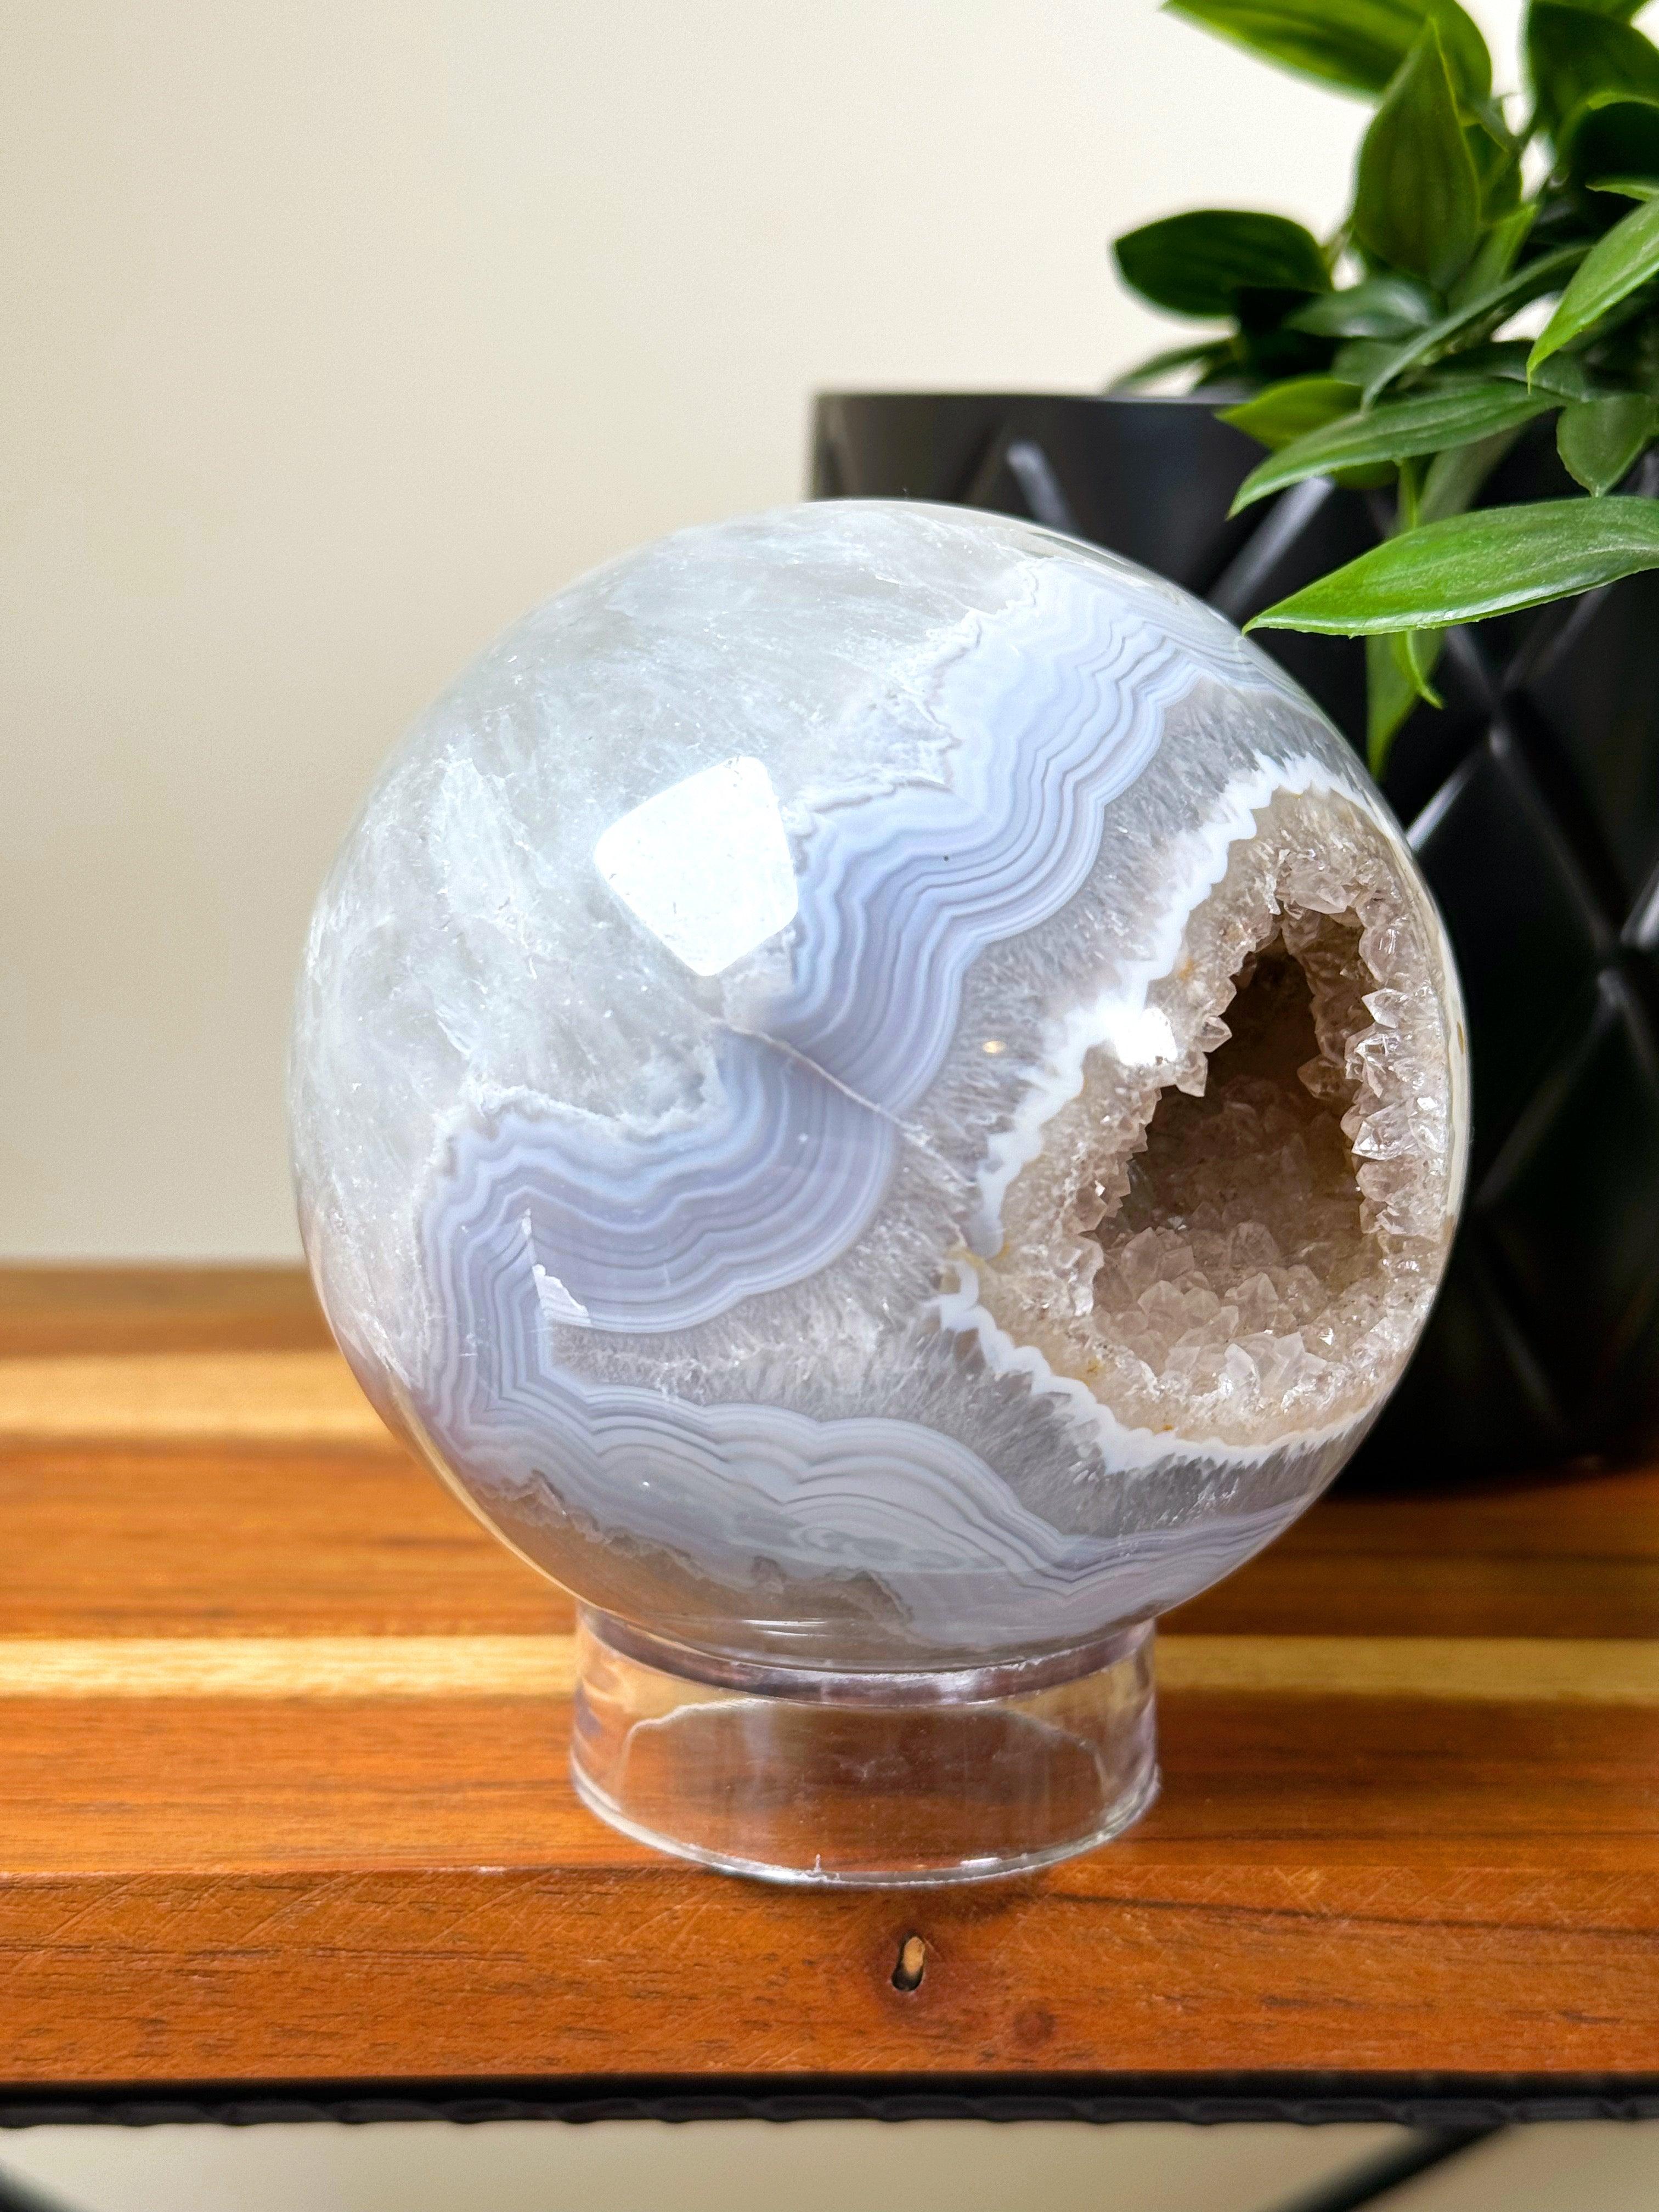 DRUZY AGATE SPHERE 3 - agate, druzy agate, googly agate, googly eye, googly eye agate, one of a kind, sphere, statement piece - The Mineral Maven